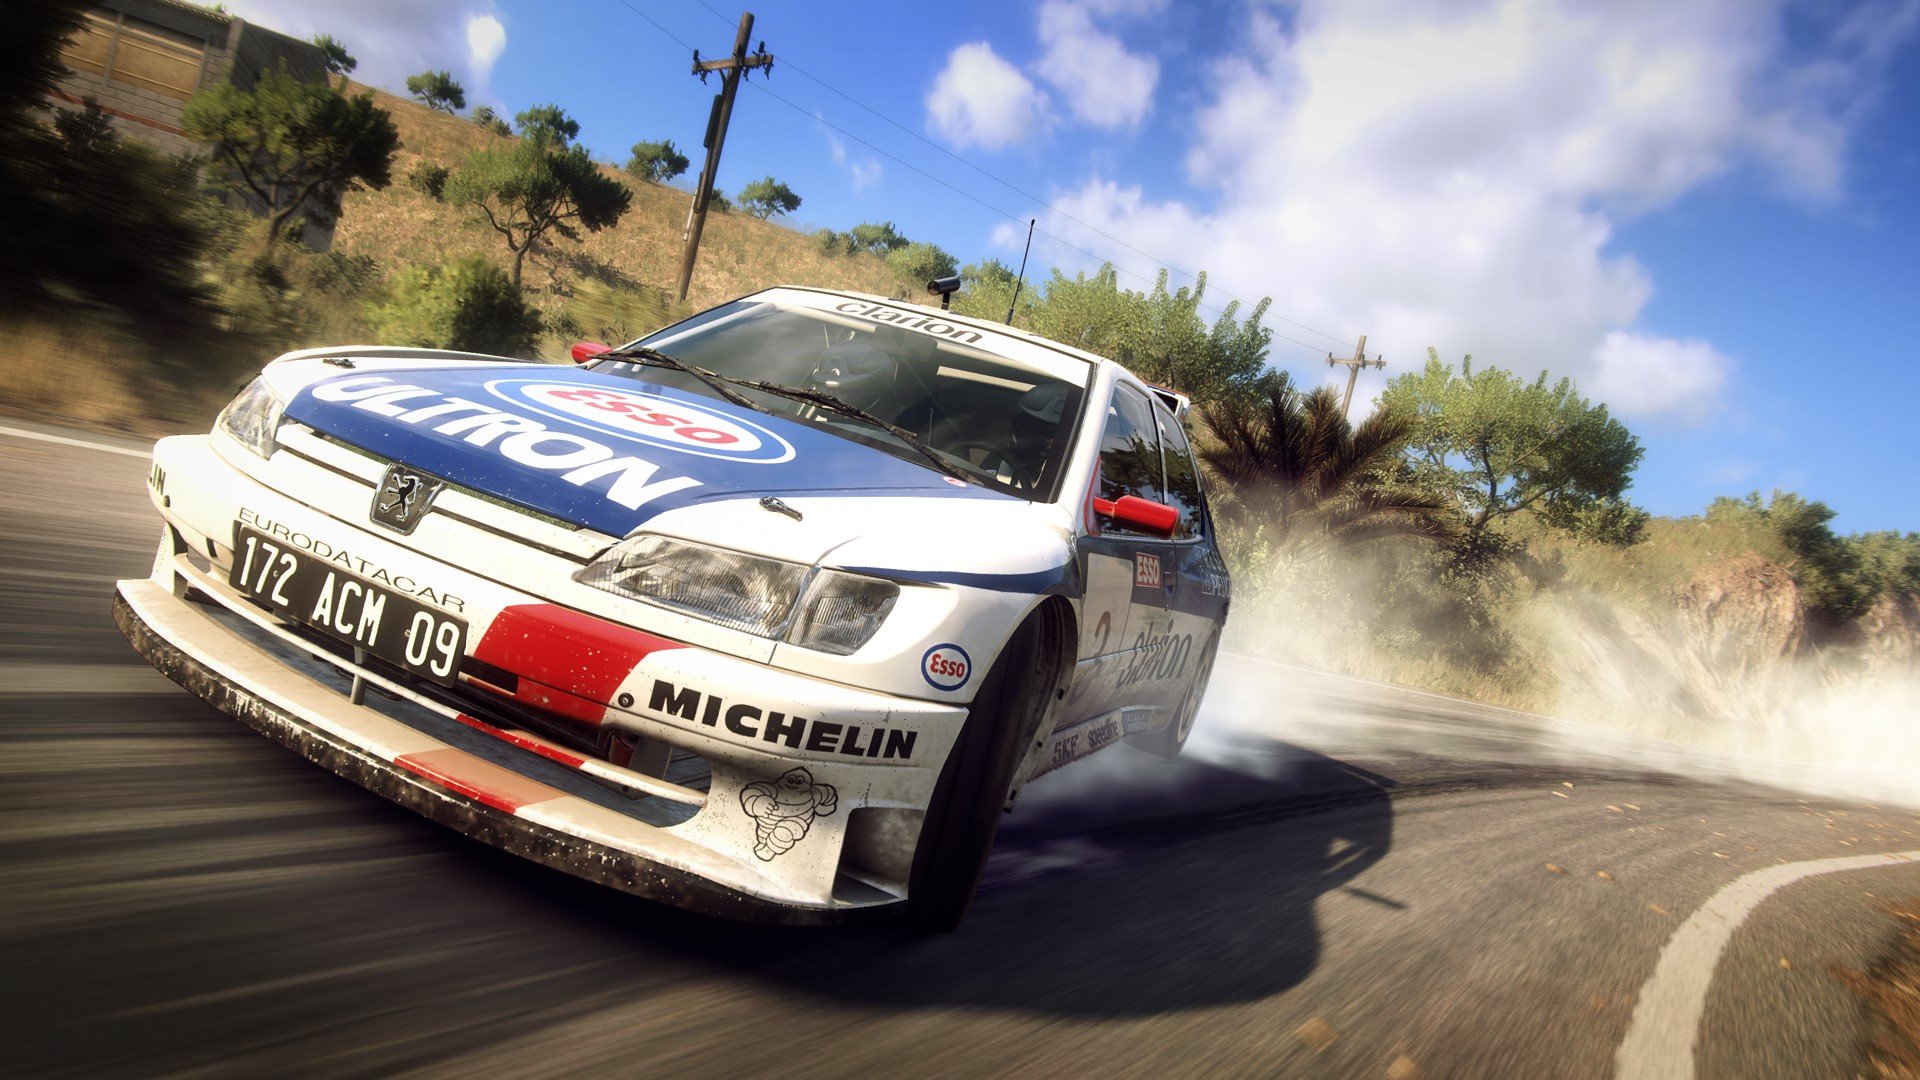 More information about "DiRT Rally 2.0: Peugeot 306 Maxi & Seat Ibiza Kit Car disponibili"